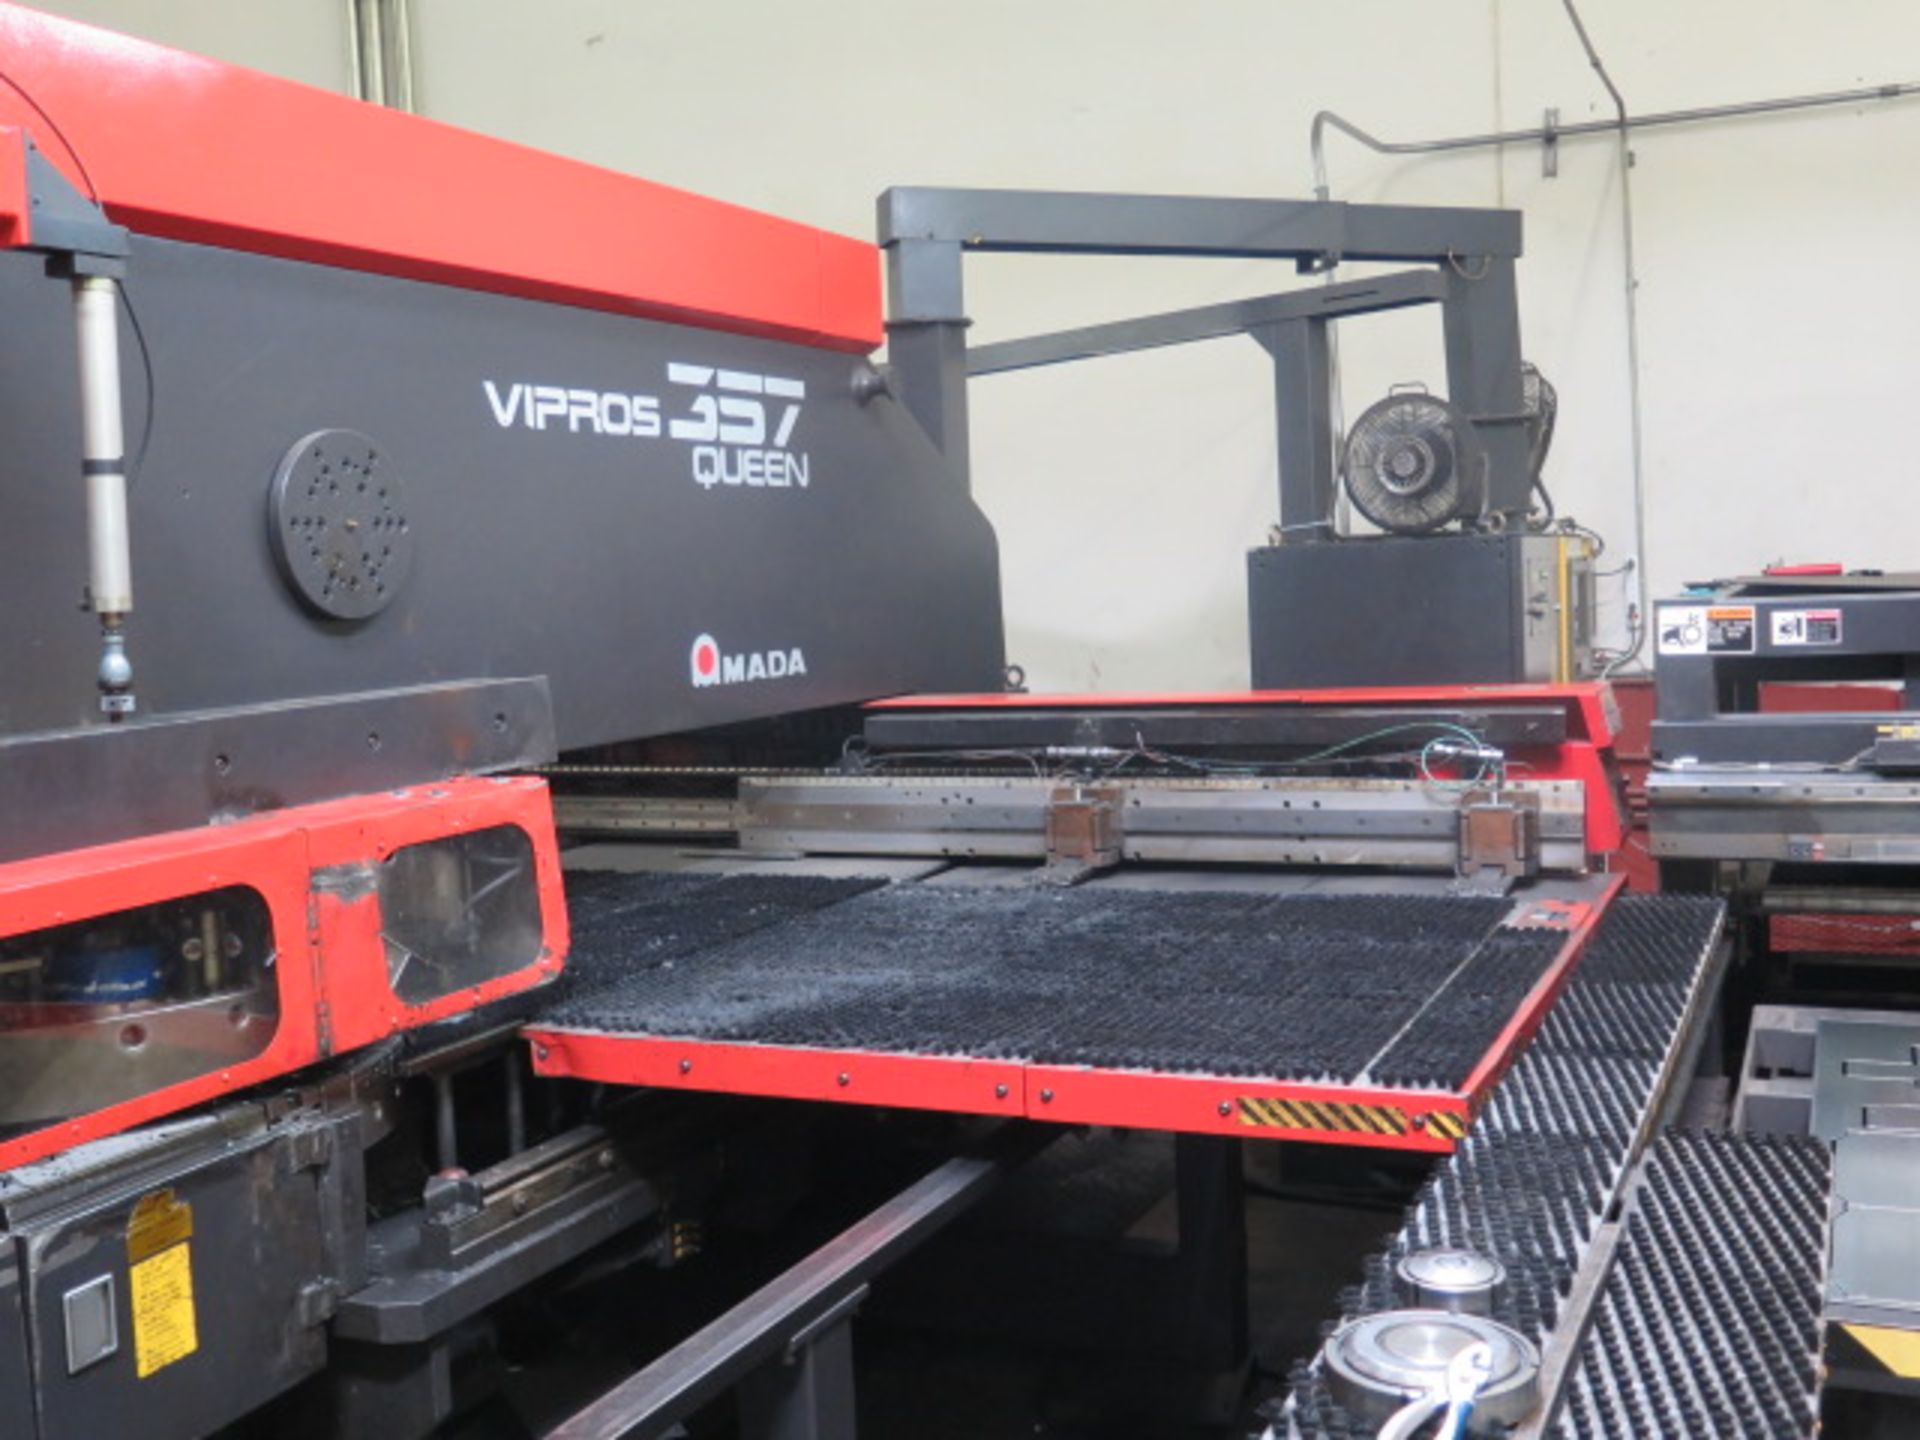 1998 Amada VIPROS 357 QUEEN 30 Ton CNC Turret Punch Press s/n 35730345 w/ O4P-C Controls, SOLD AS IS - Image 4 of 30